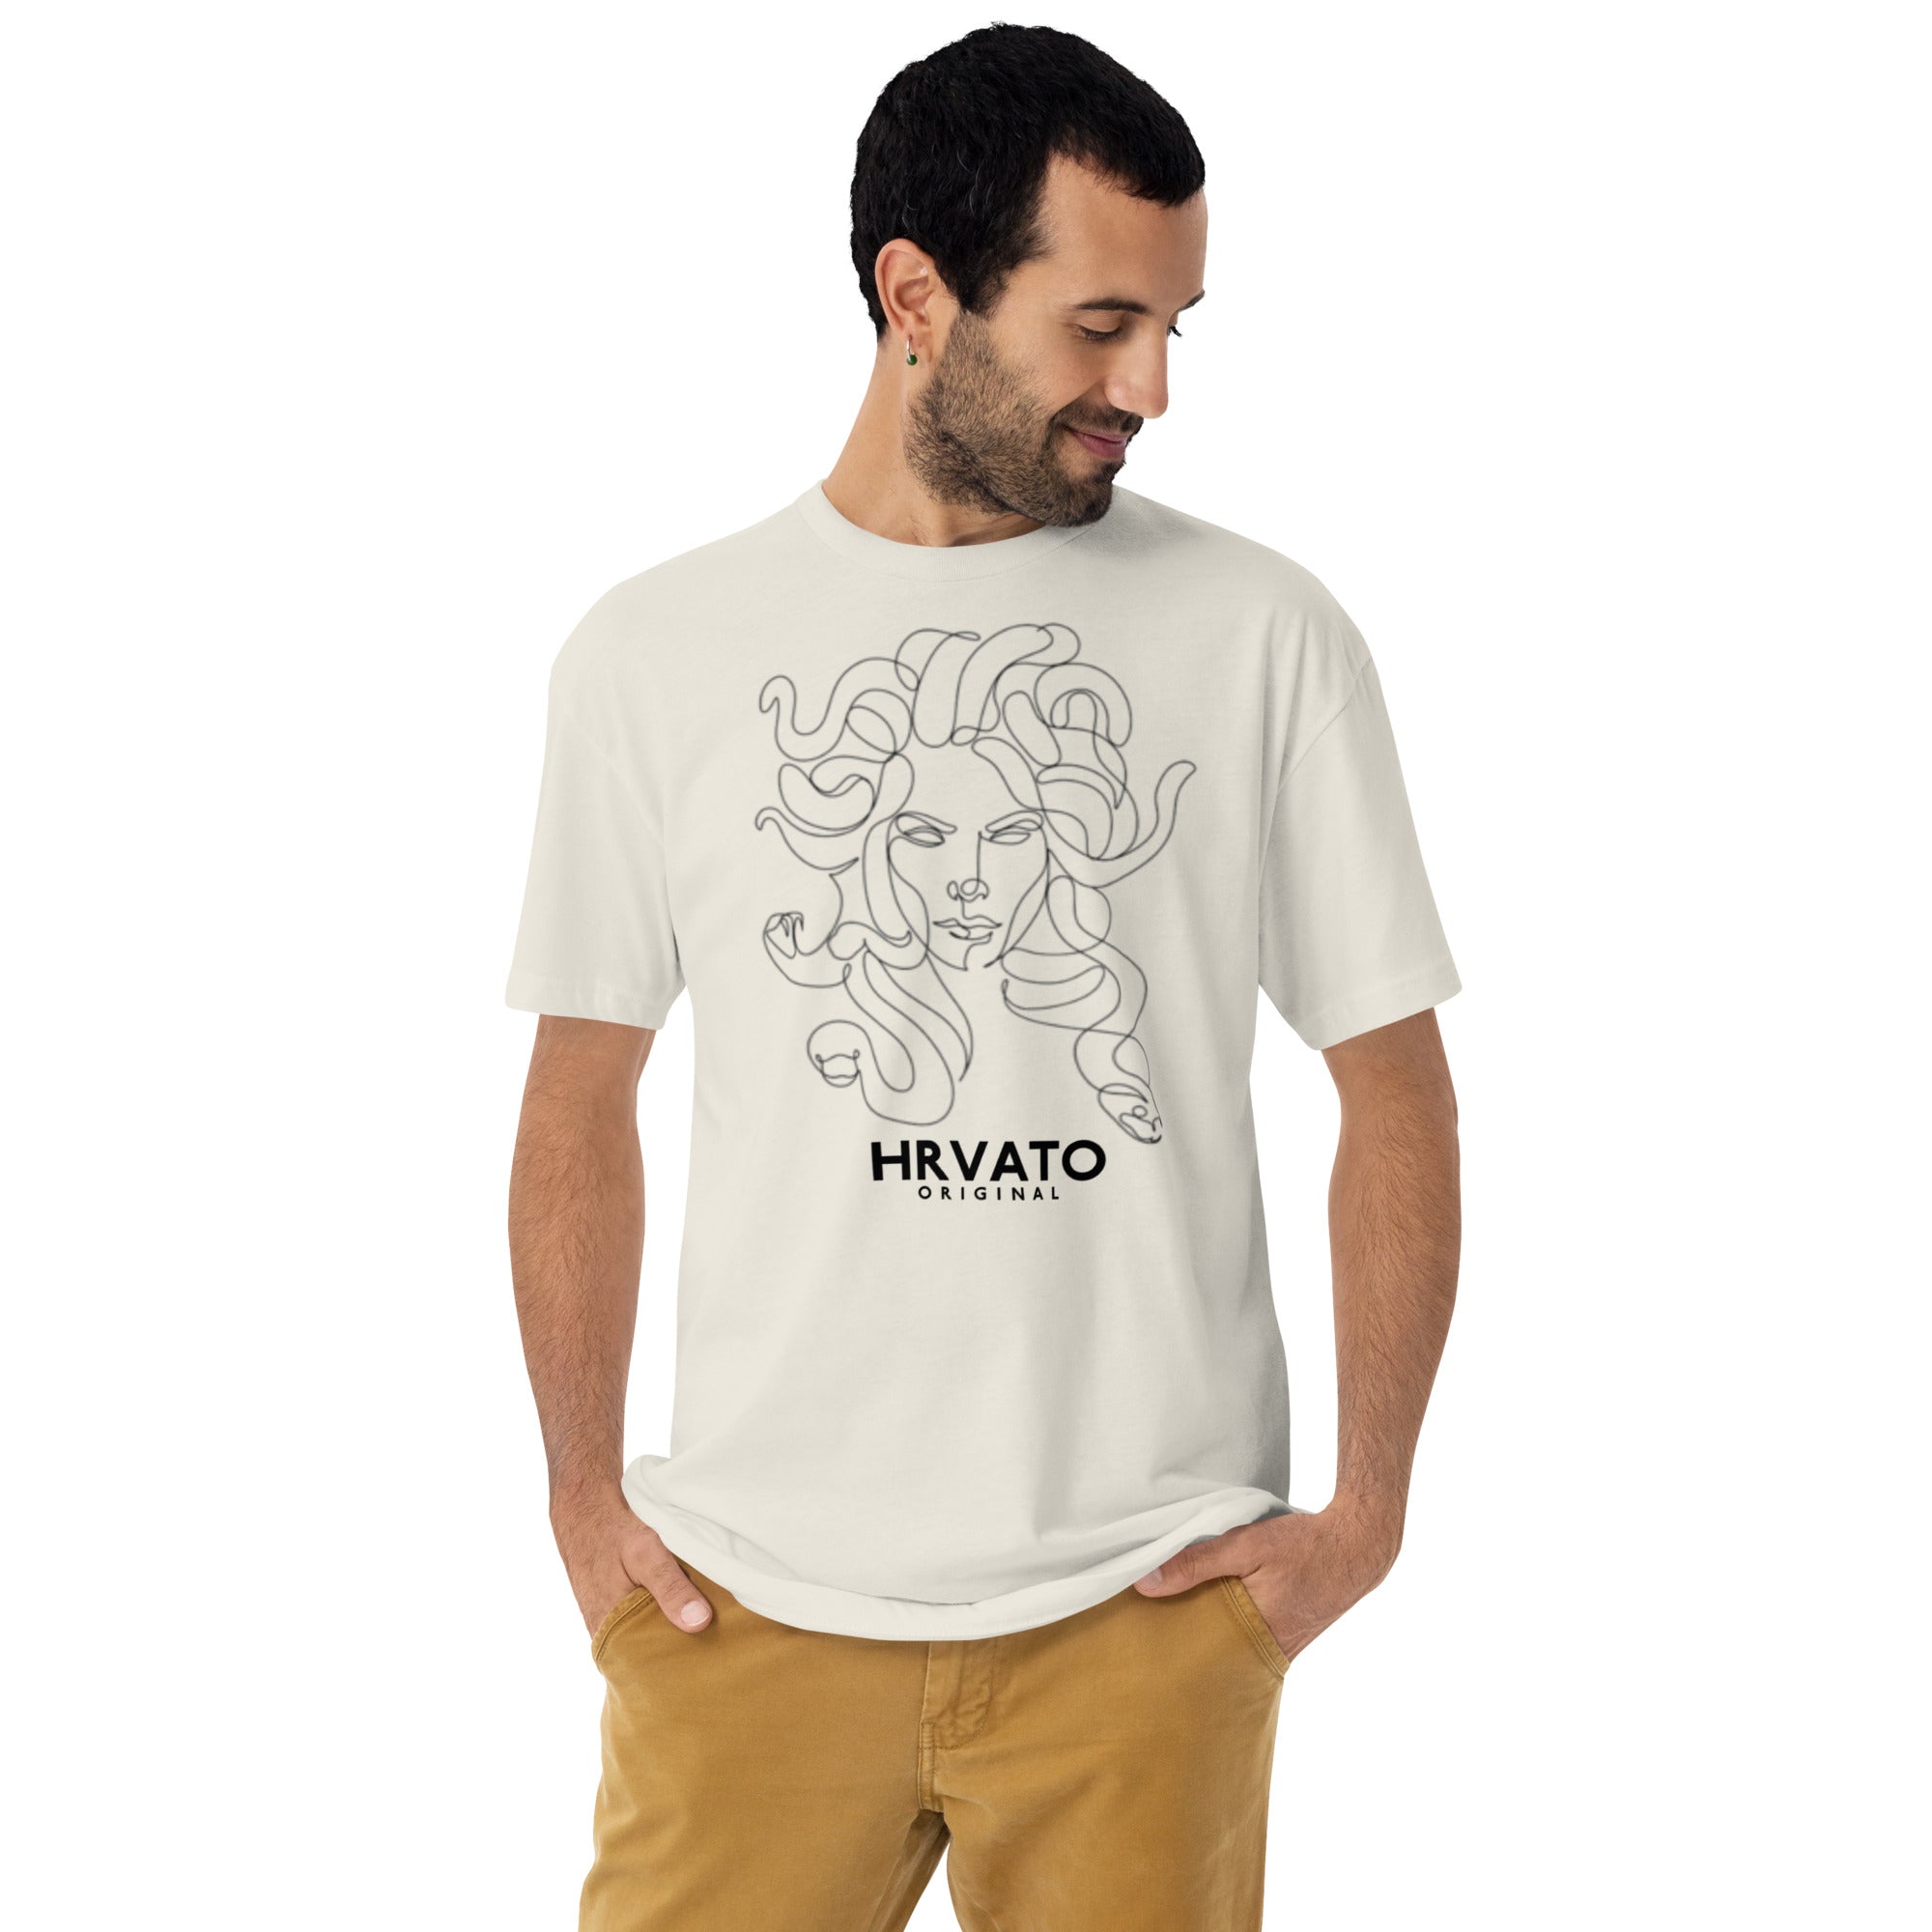 Croatian sustainable MADUSA Men's T-Shirt - Unique Croatian Design with Mythical Twist